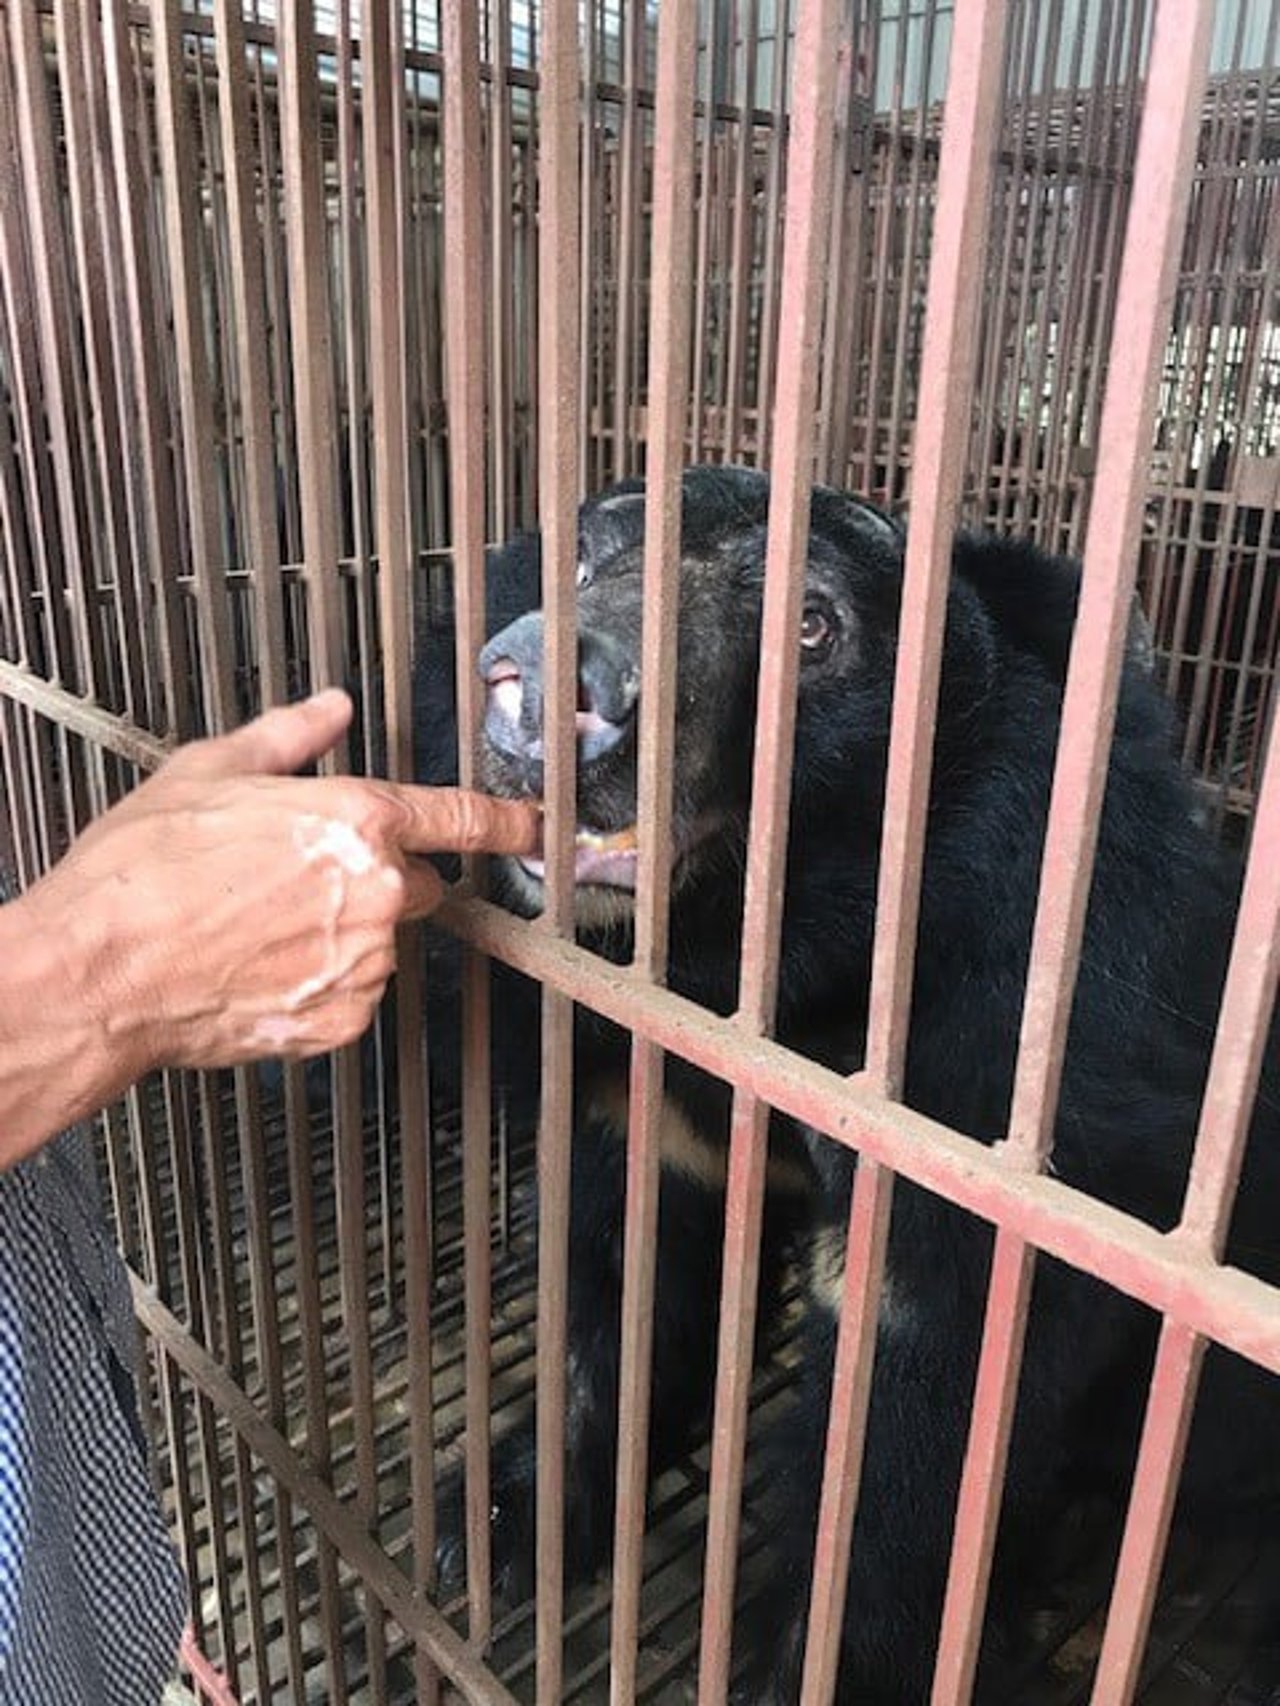 a bear owner touches their captive bear who is behind bars